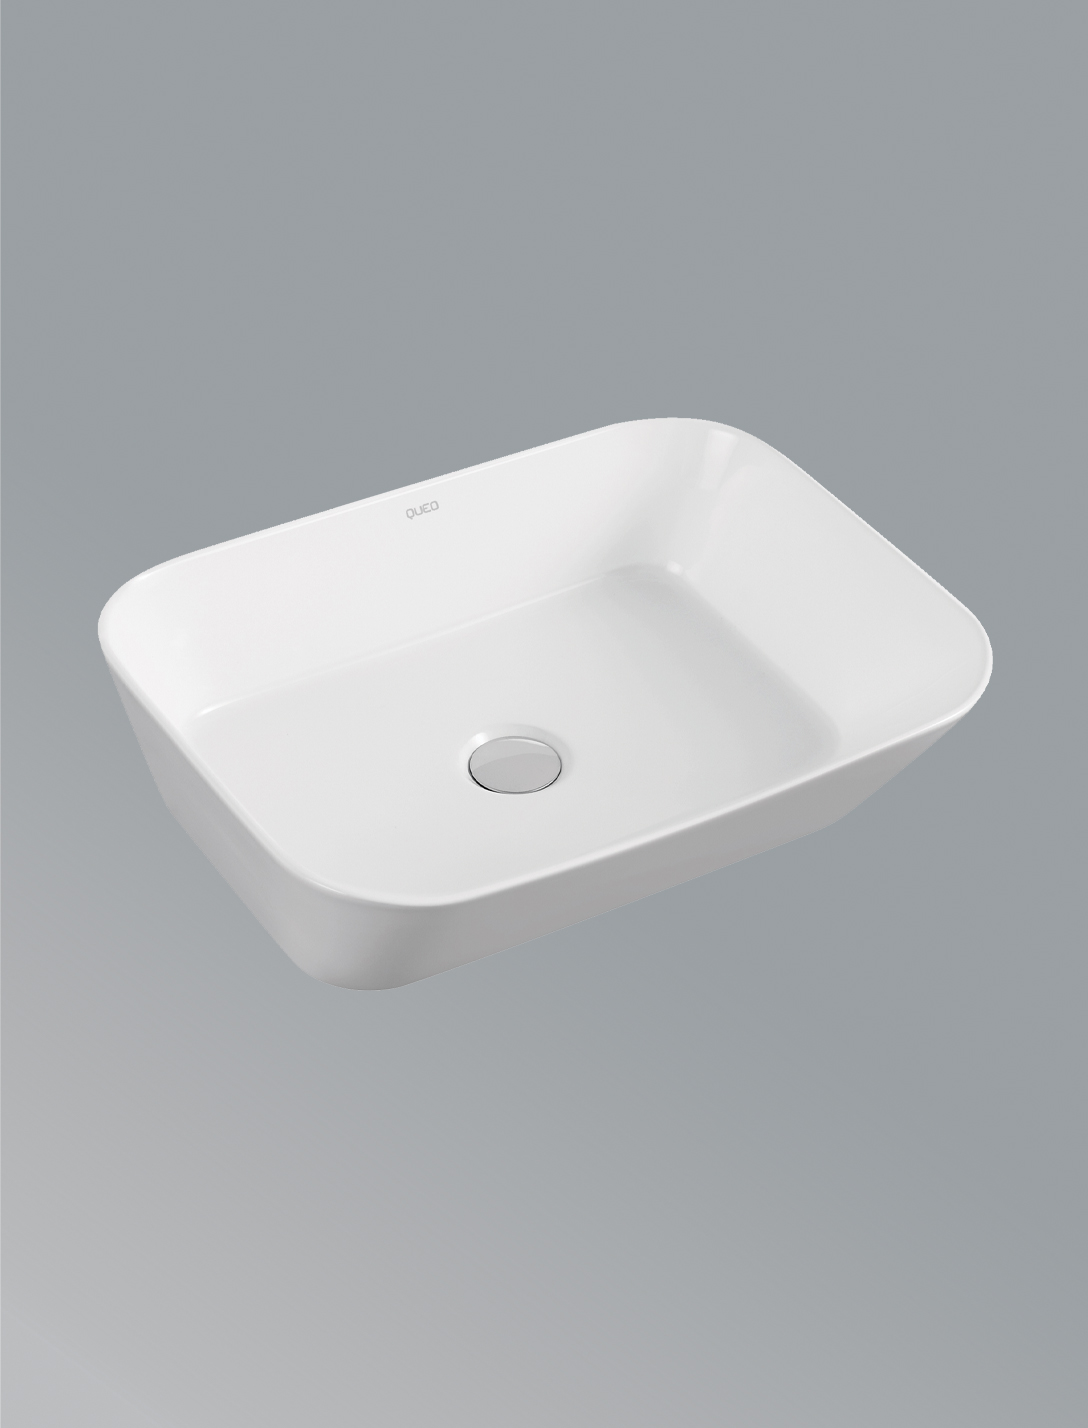 over-the-counter-basin-without-faucet-hole-in-white